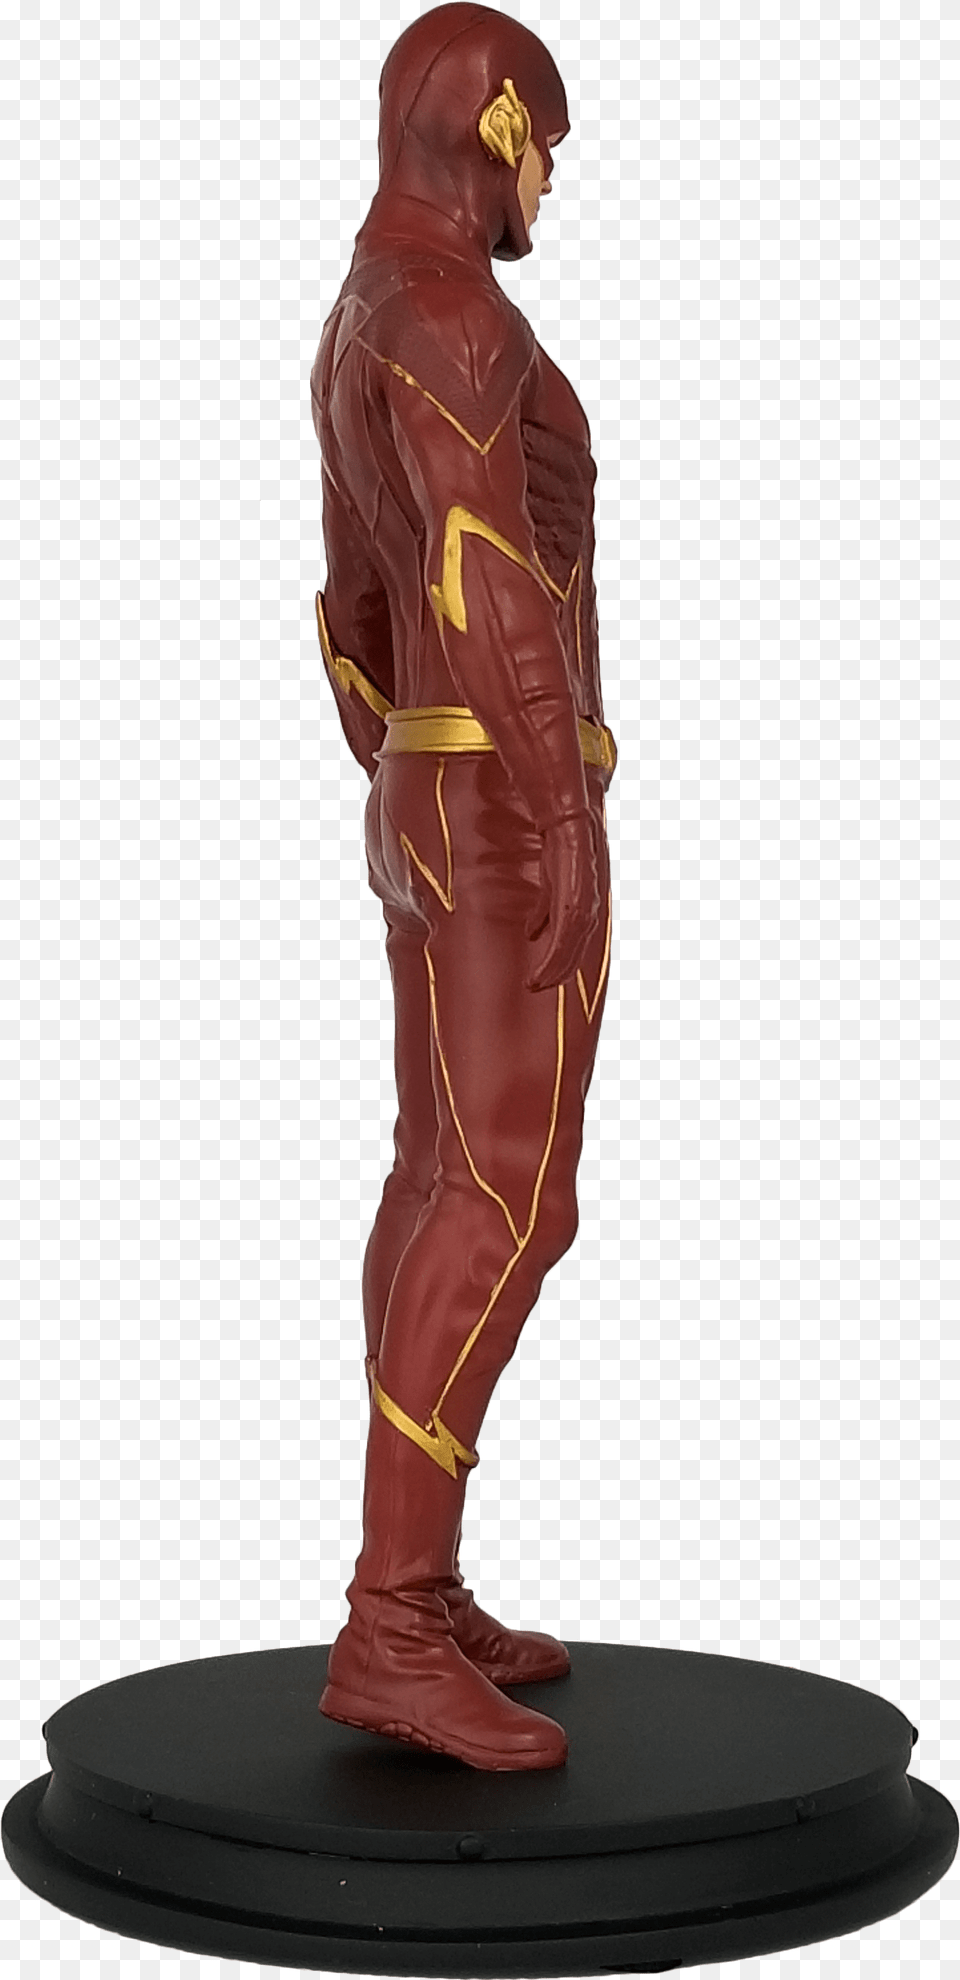 Action Figure Insider New Dc Tv Arrow And Flash Cw The Flash Season 1 Wallpaper 4k, Figurine, Adult, Male, Man Png